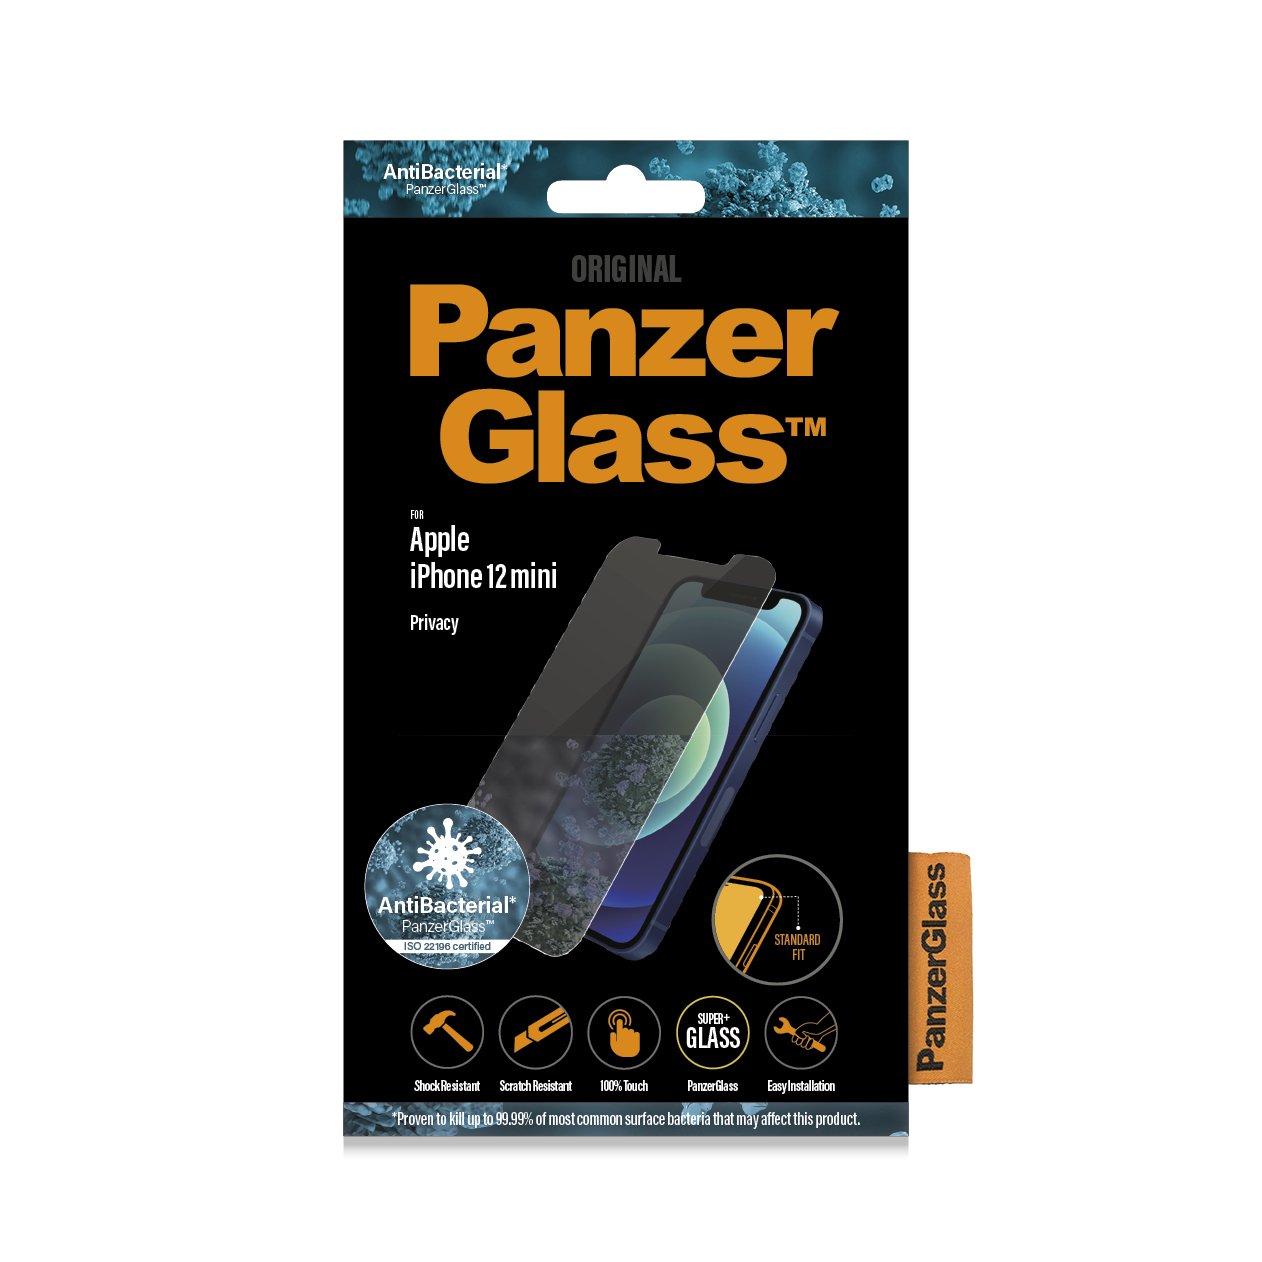 Panzerglass Tempered Glass Privacy iPhone 12 Series